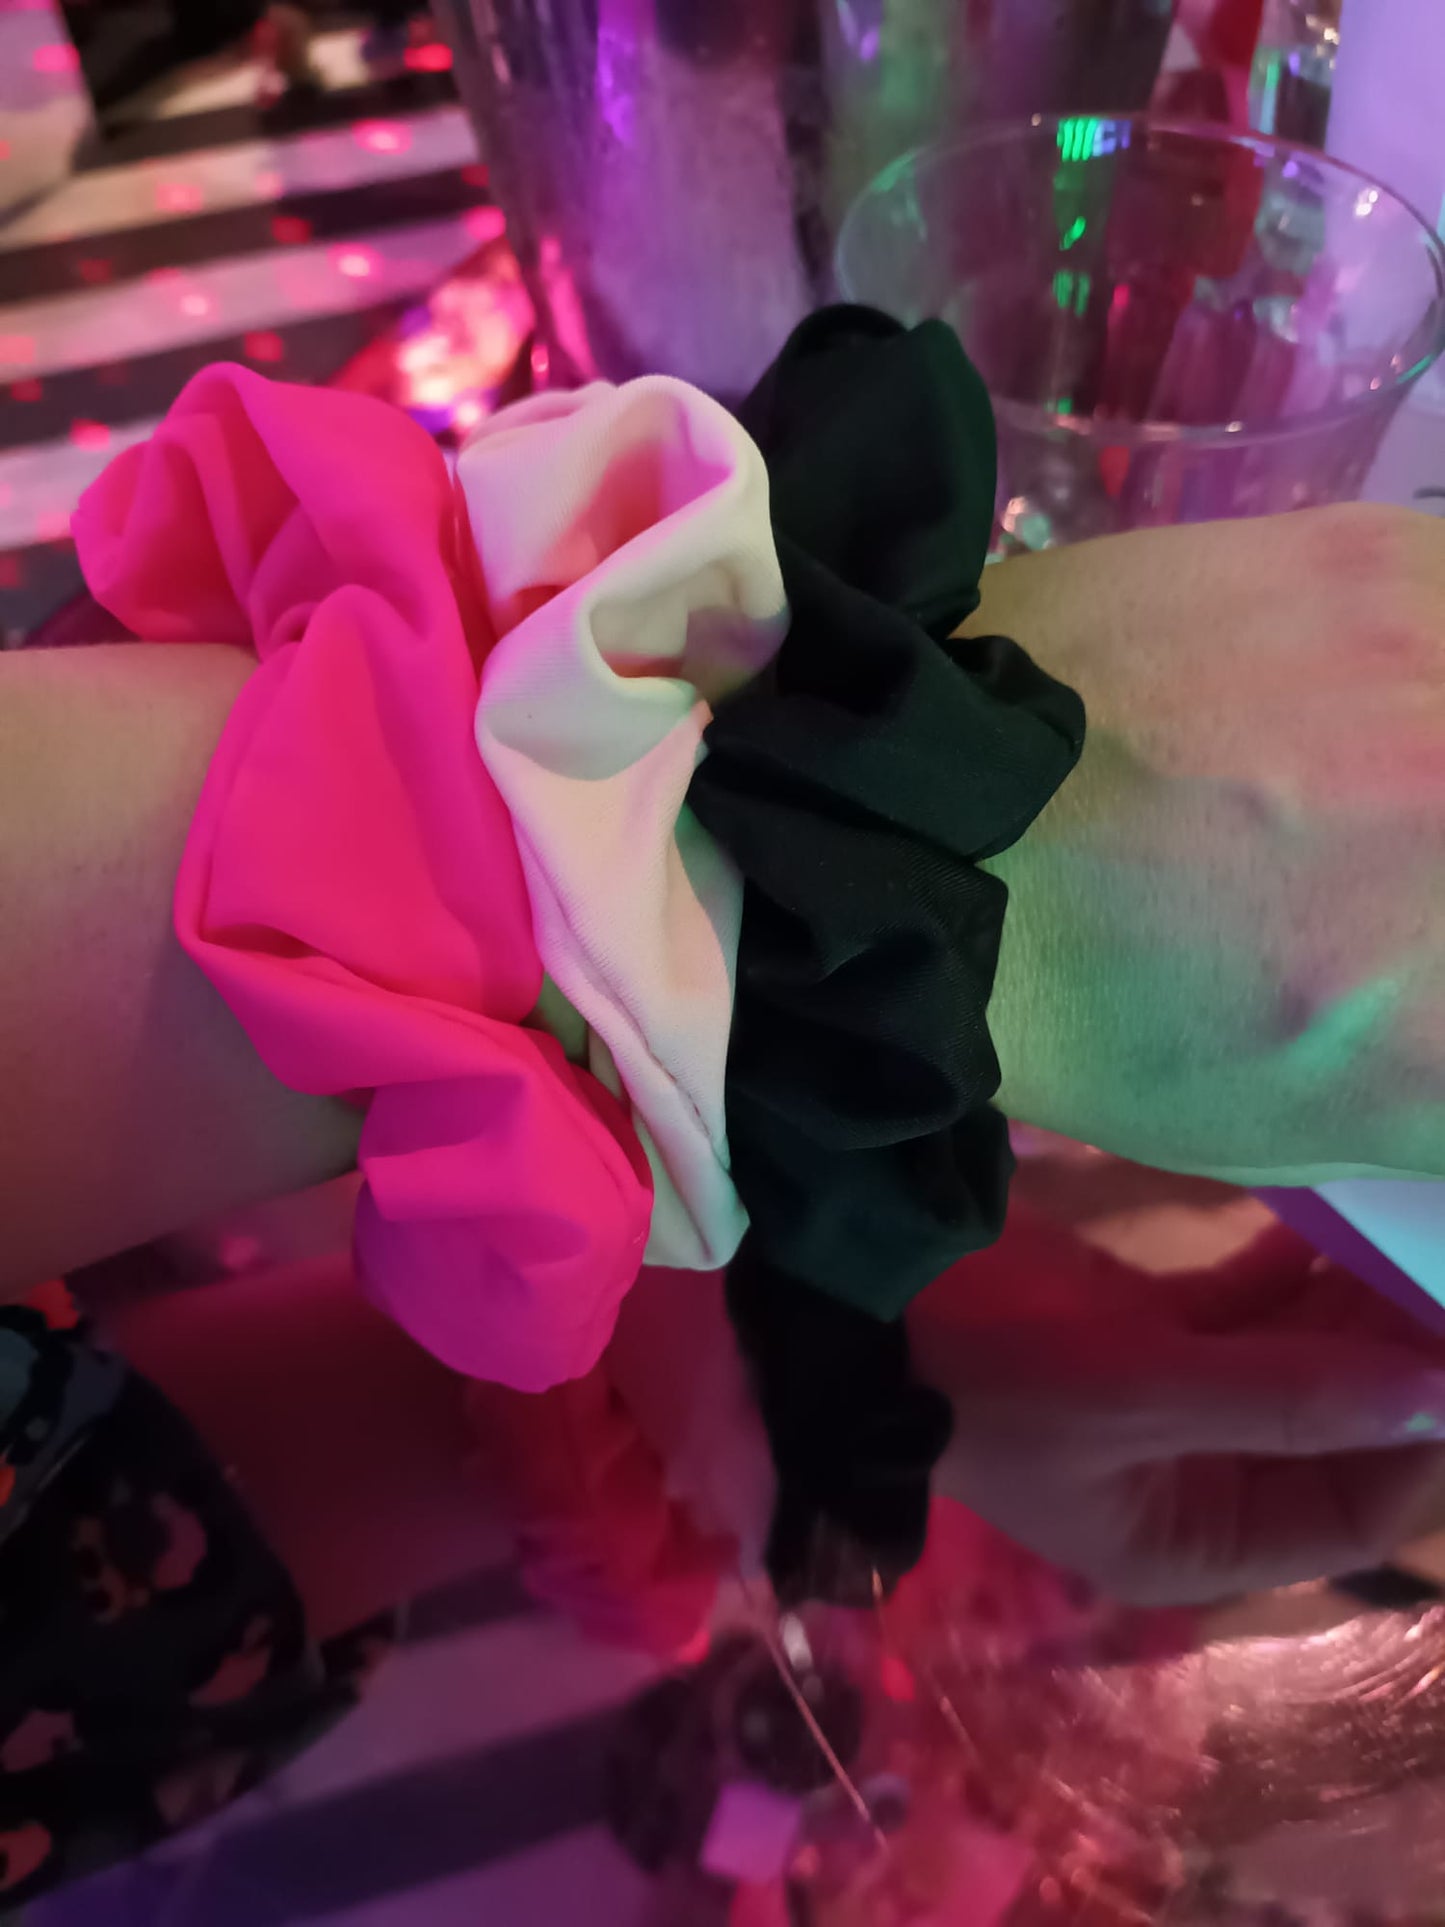 Protective and Practical: Introducing The Anti Spiking Hair Scrunchie Drink Cover